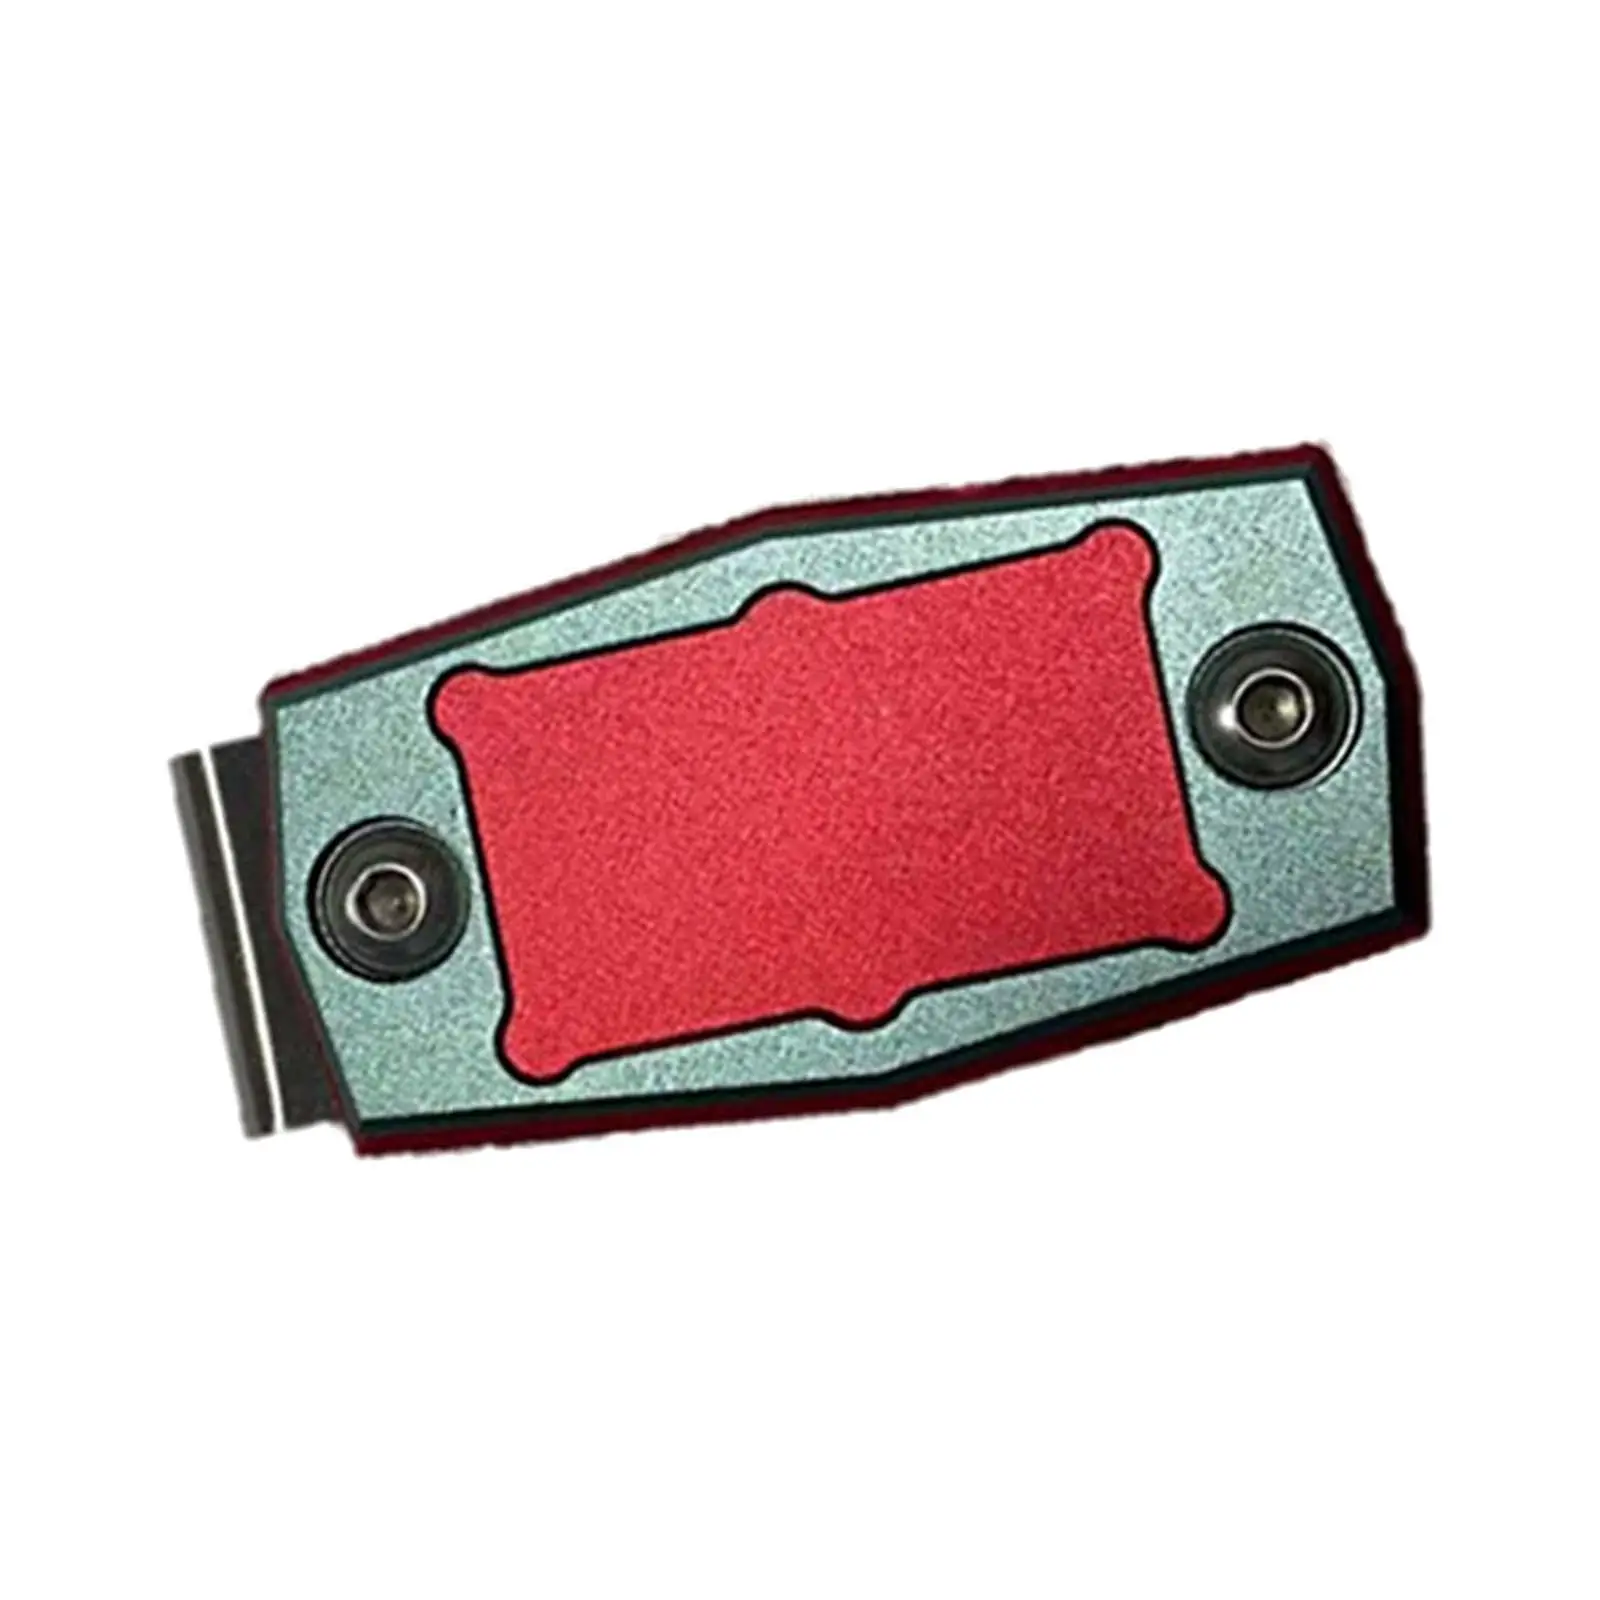 Magnetic Chalk Belt Clip Use with Chalk Case for Snooker Billiard Pool Practical Tool